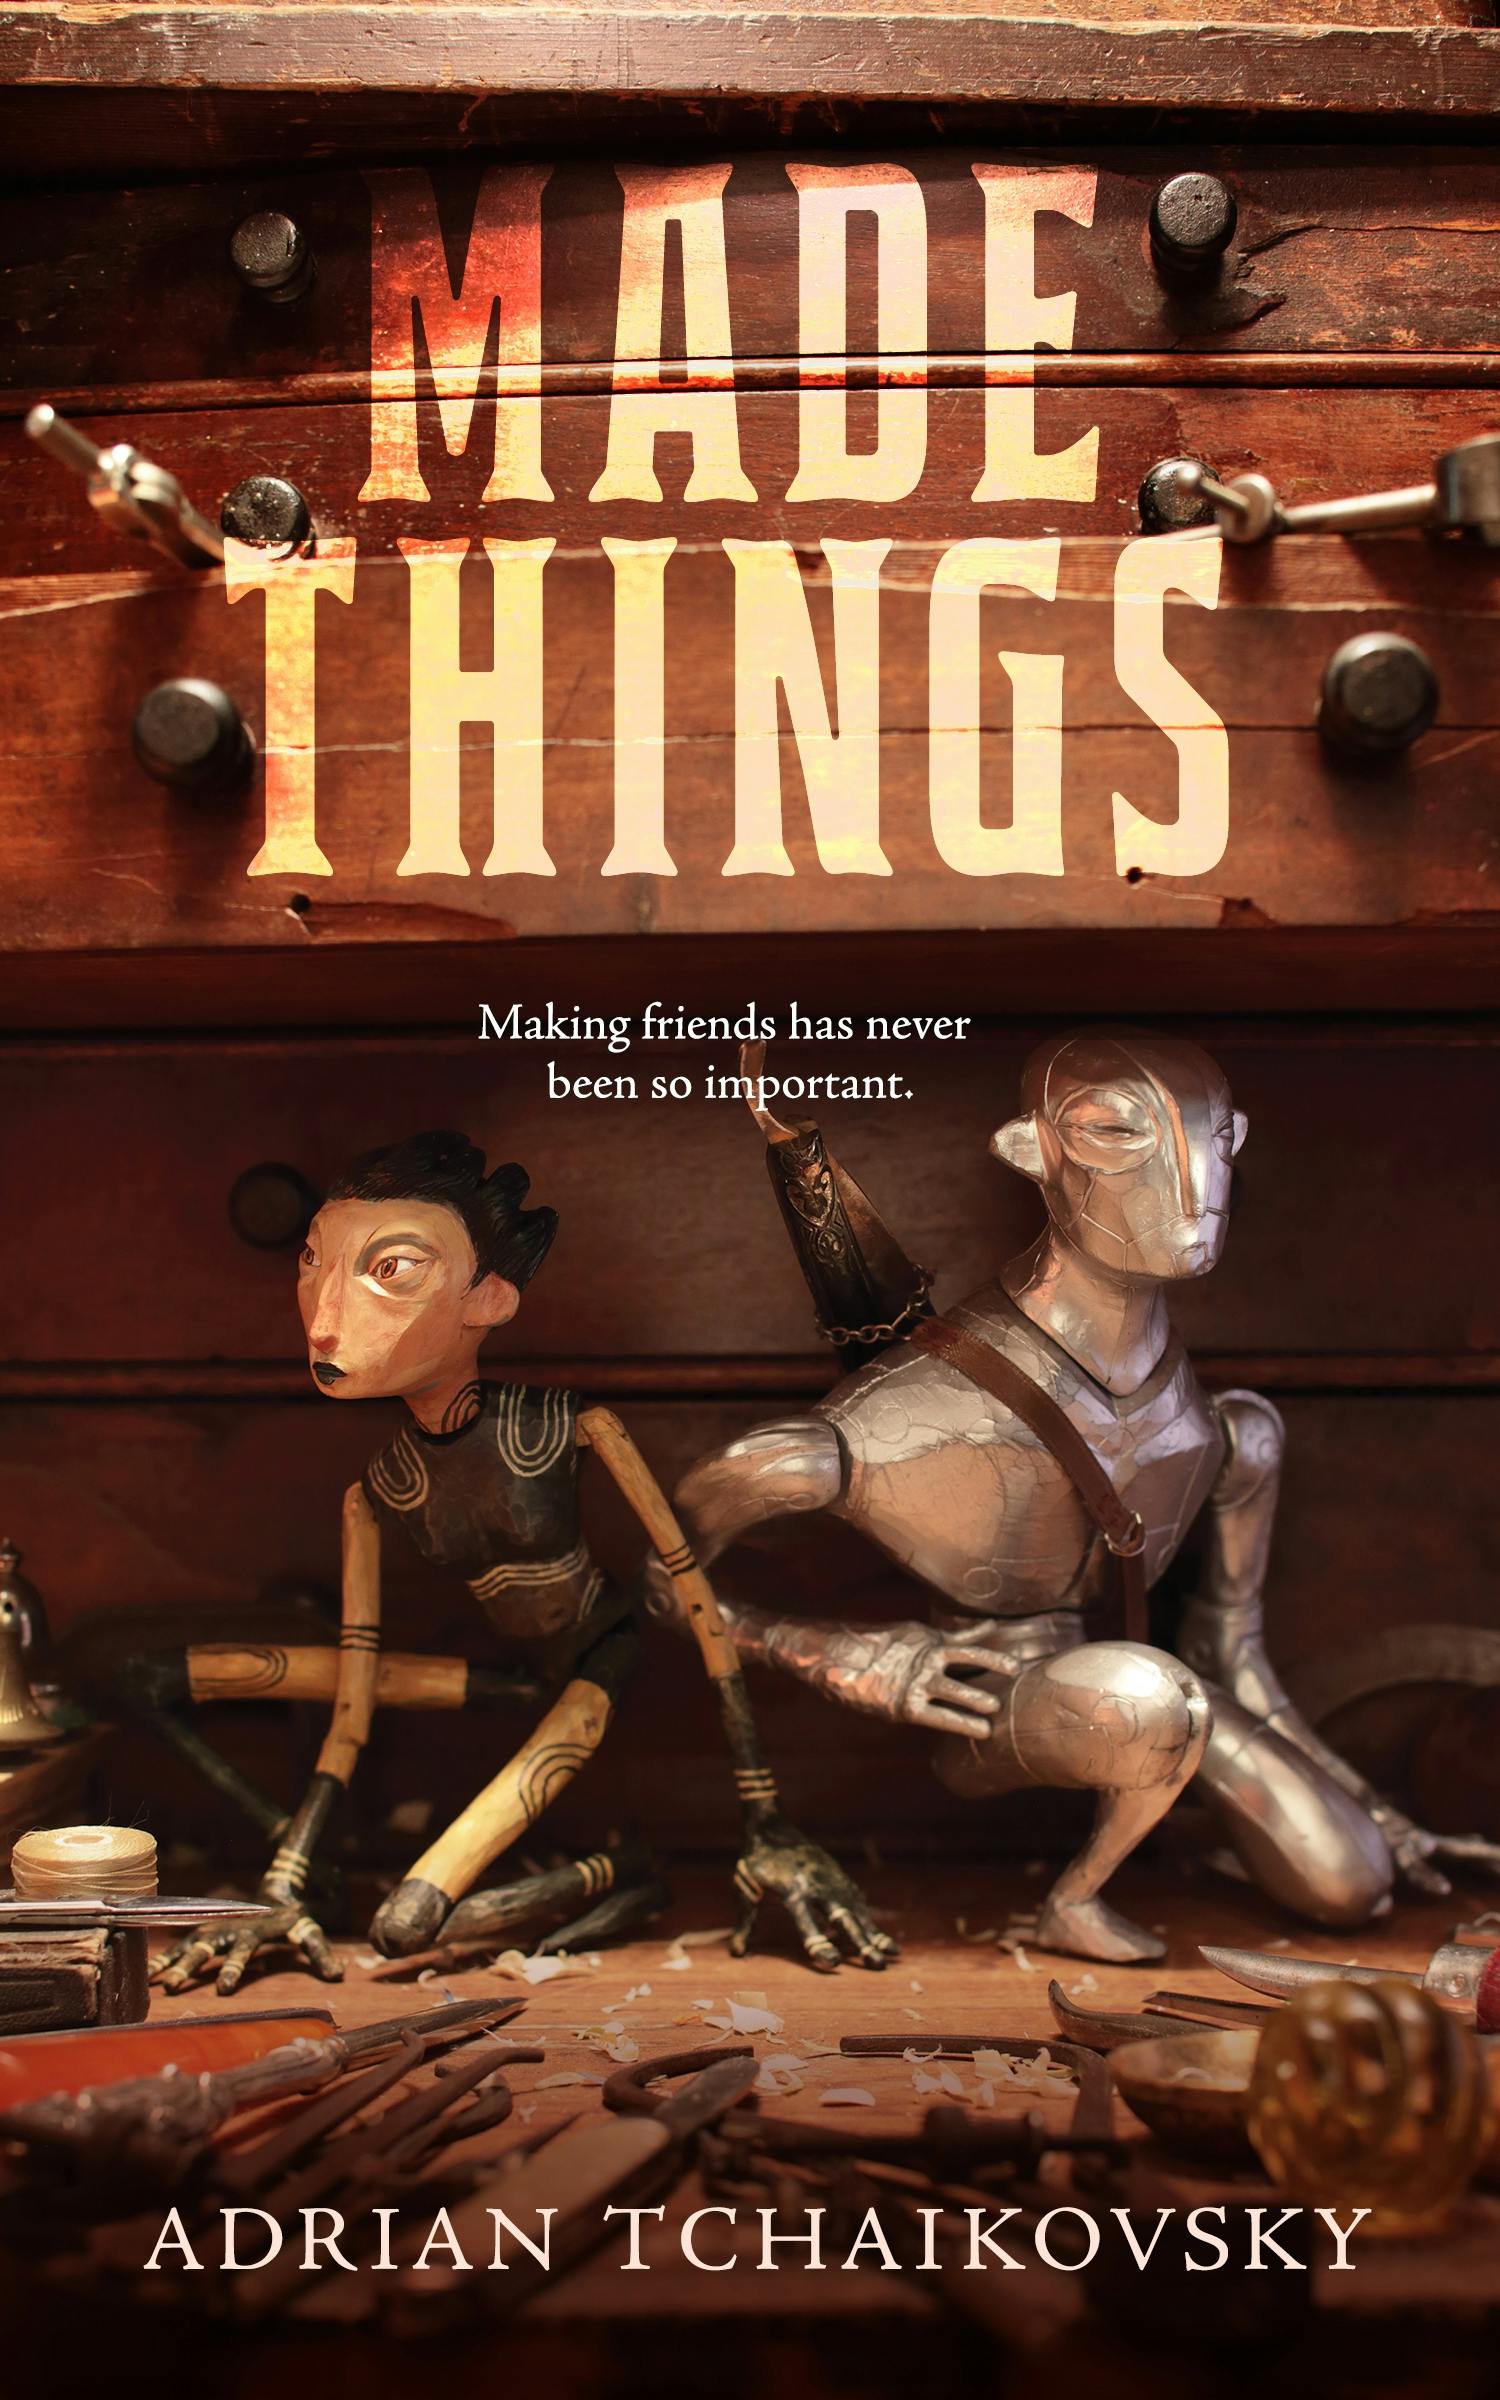 Cover for the book titled as: Made Things